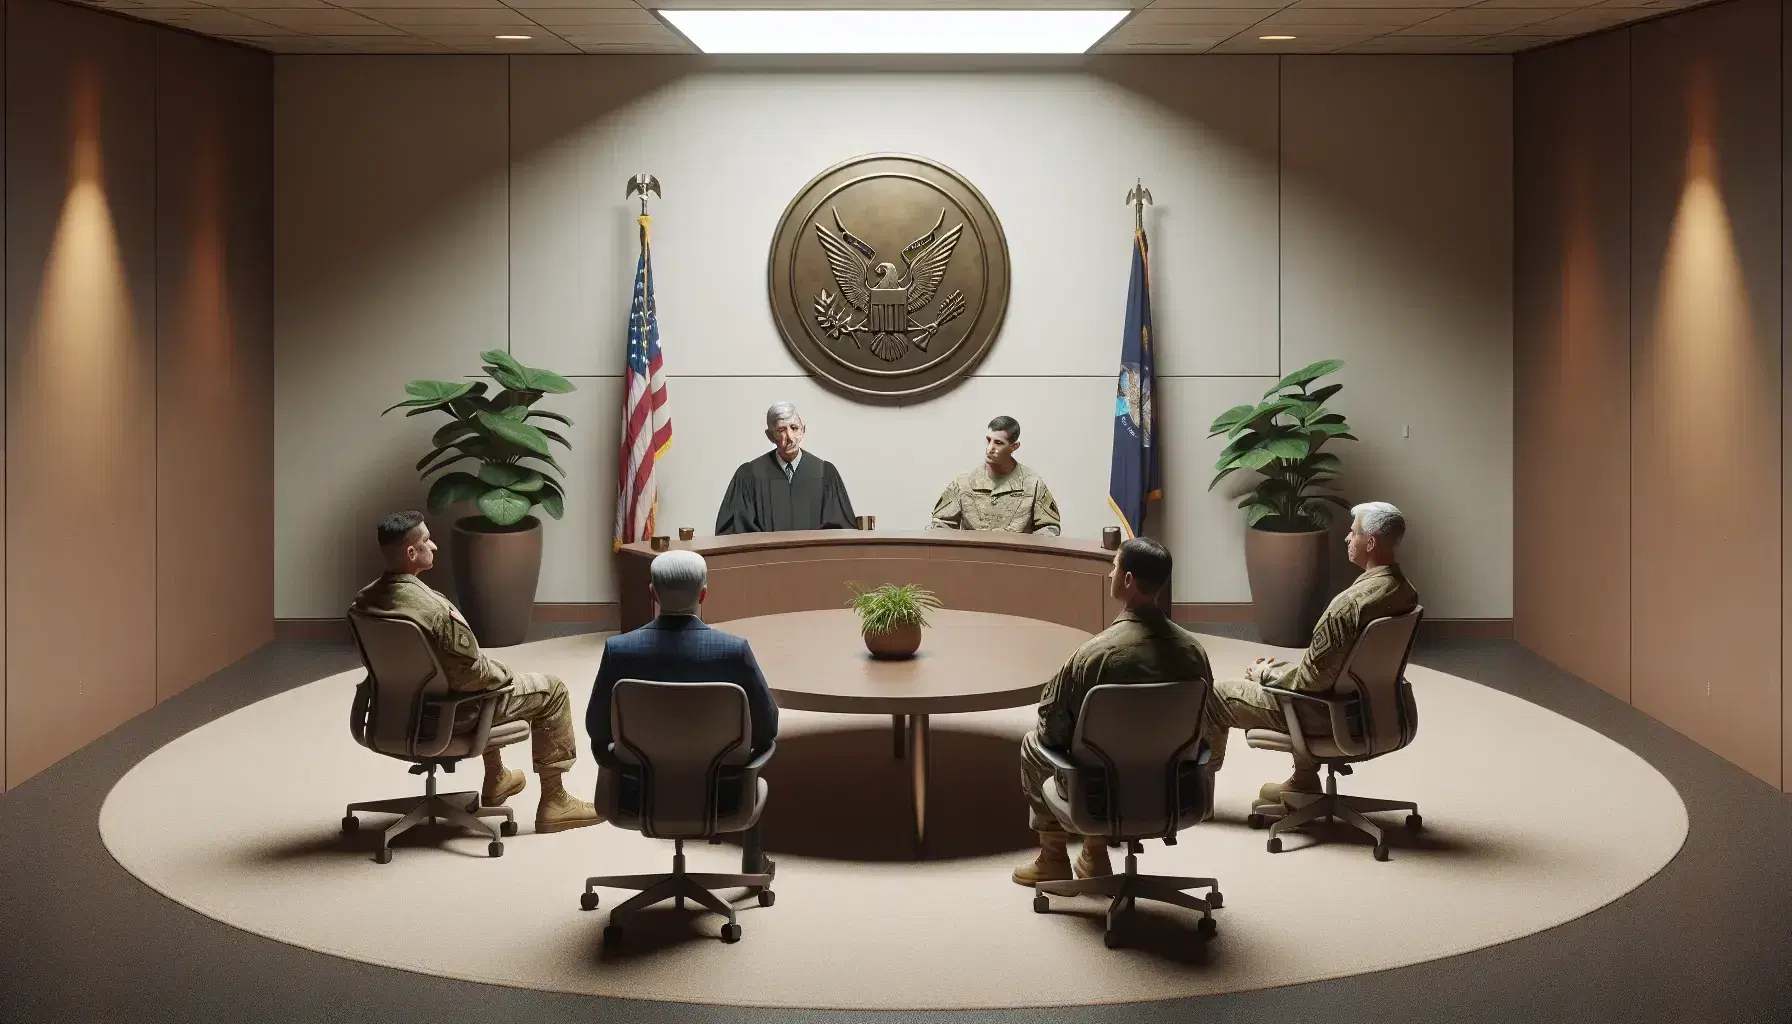 Therapeutic court for veterans with round table, judge, soldier, lawyer and civilian sitting, seal on the wall and flag on the side.